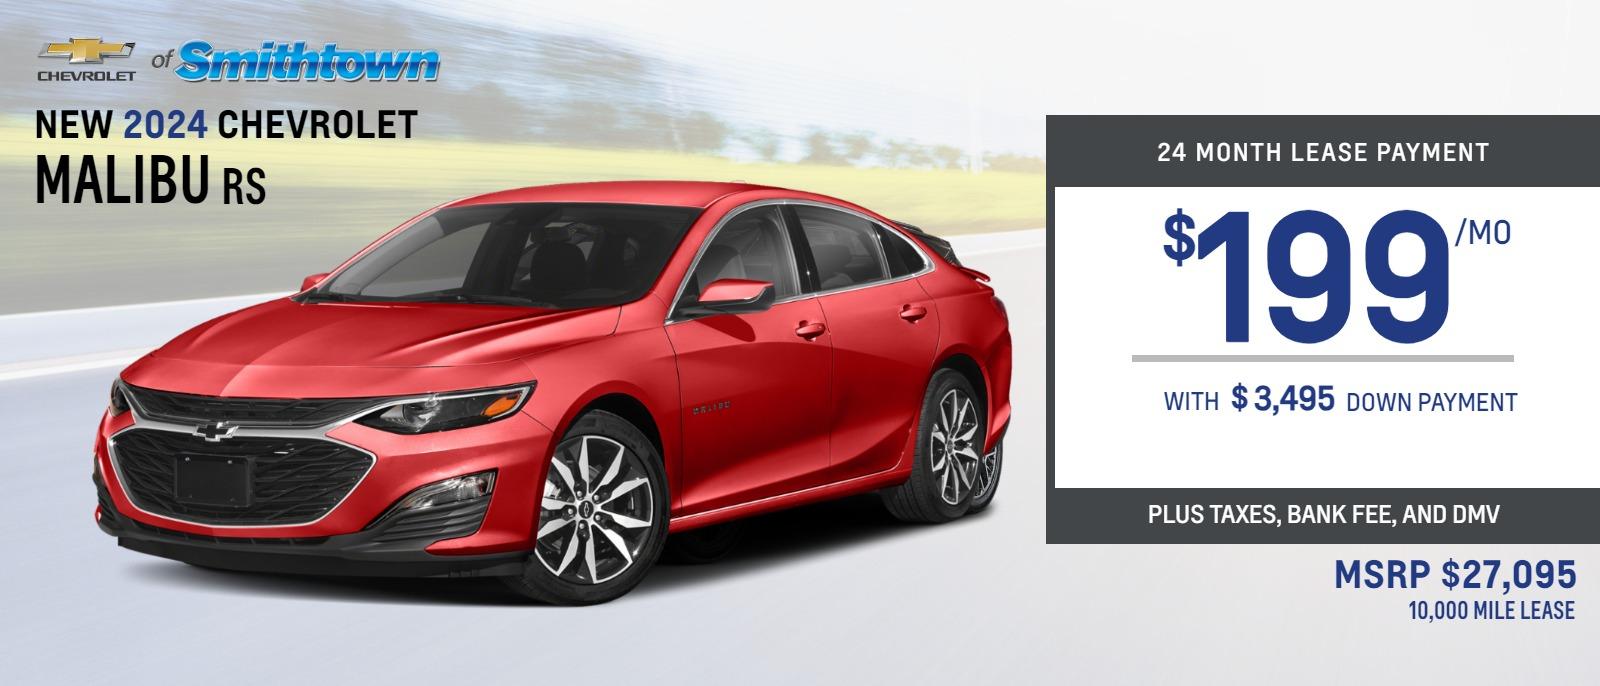 2024 Chevrolet Malibu RS
MSRP $27,095.
24 months
10k
$219. month
$2,995. down, taxes, bank fee and DMV